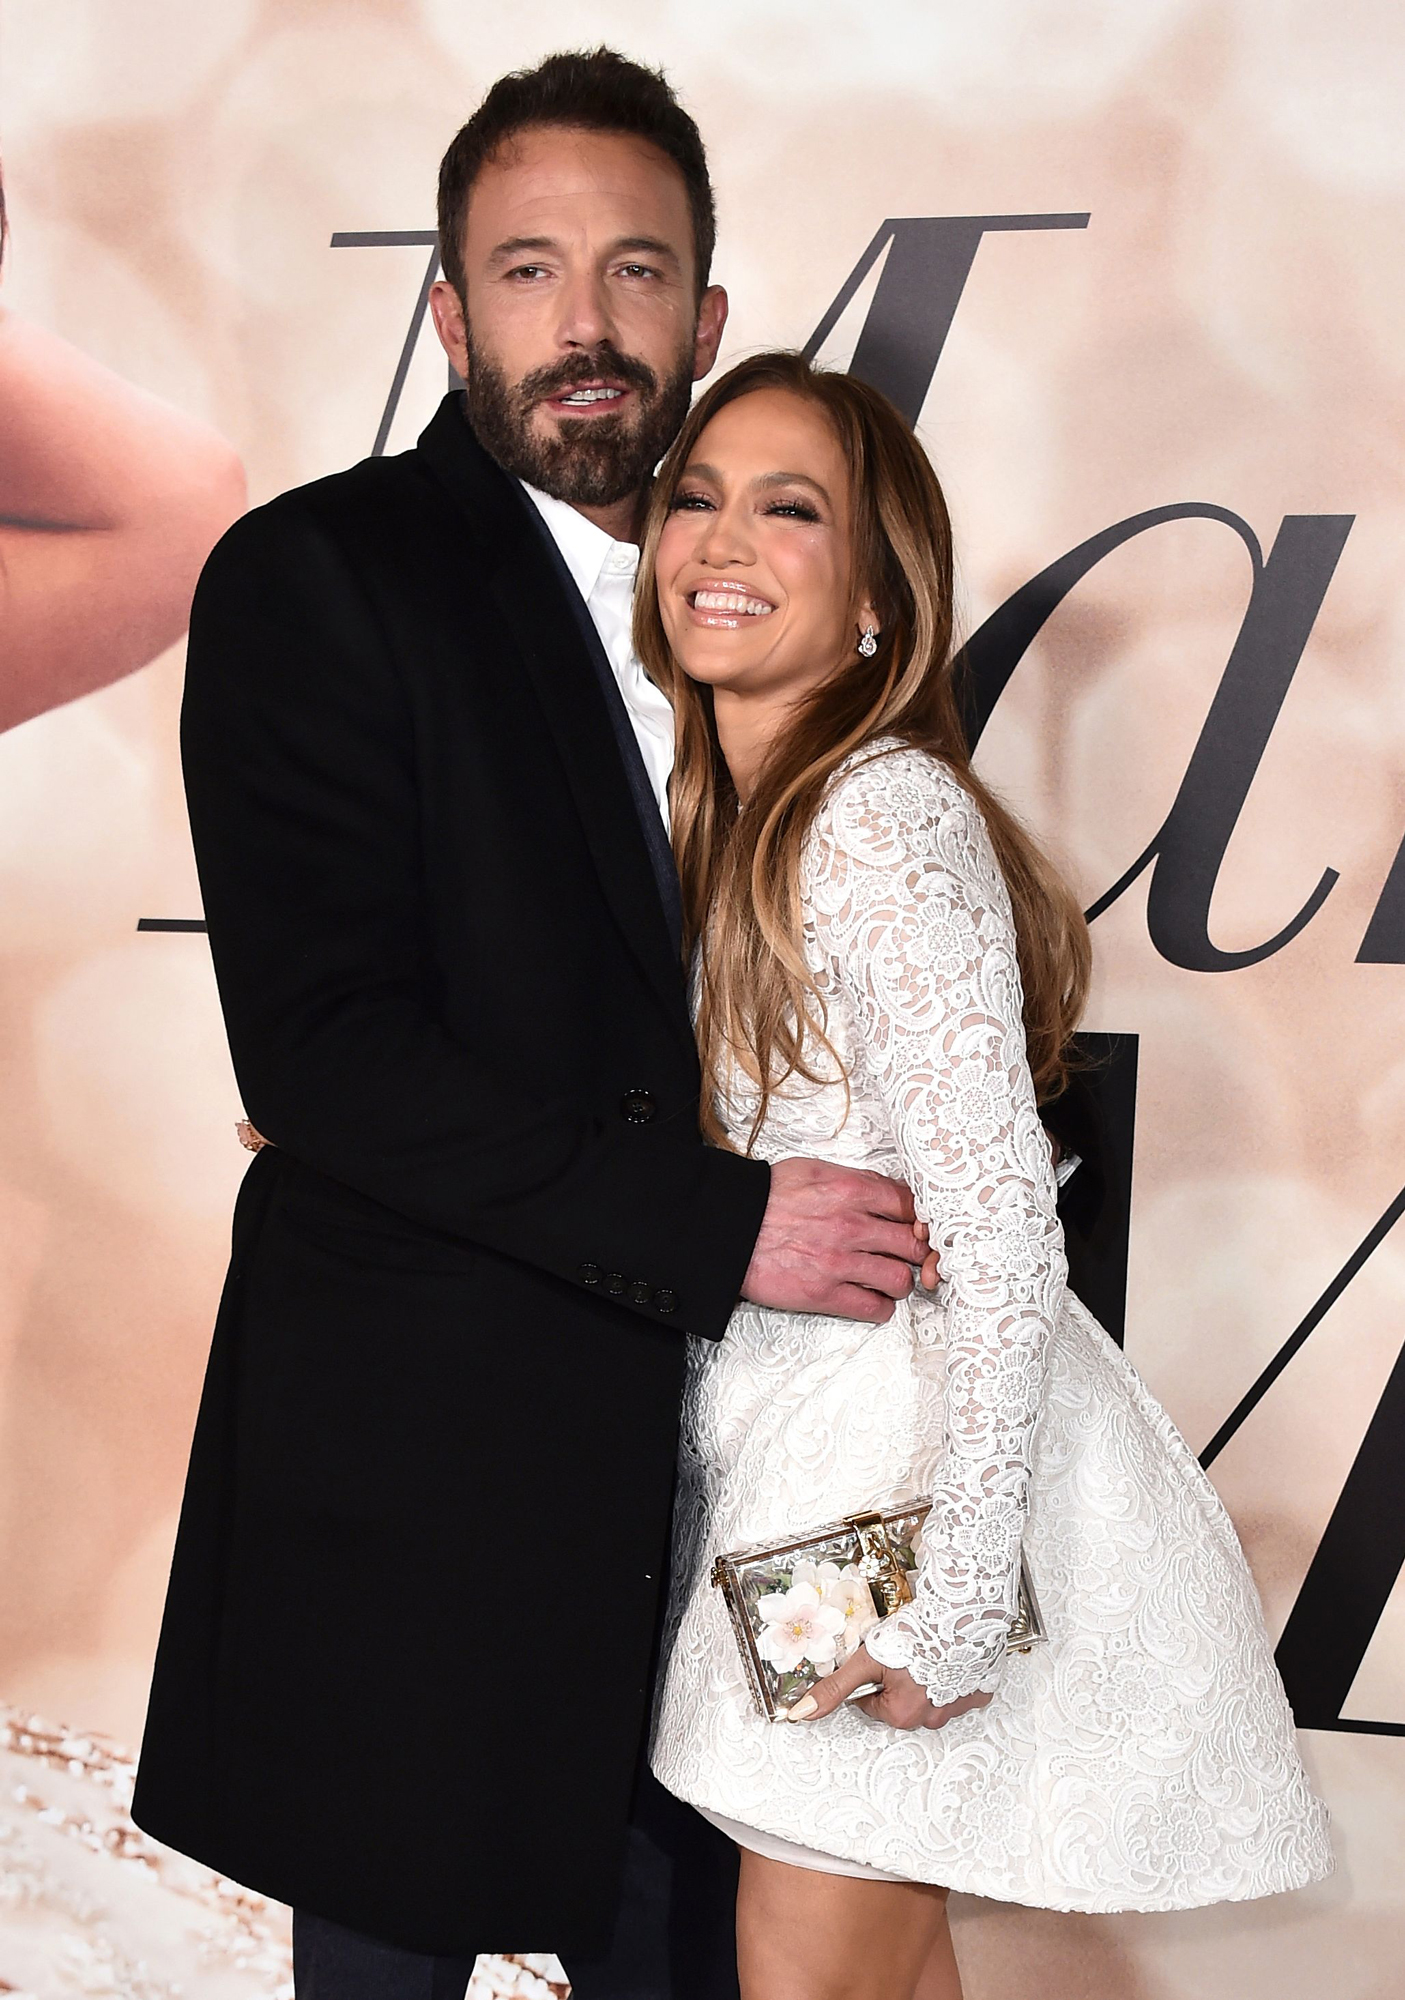 What Jennifer Lopez and Ben Affleck Have Said About Their Relationship